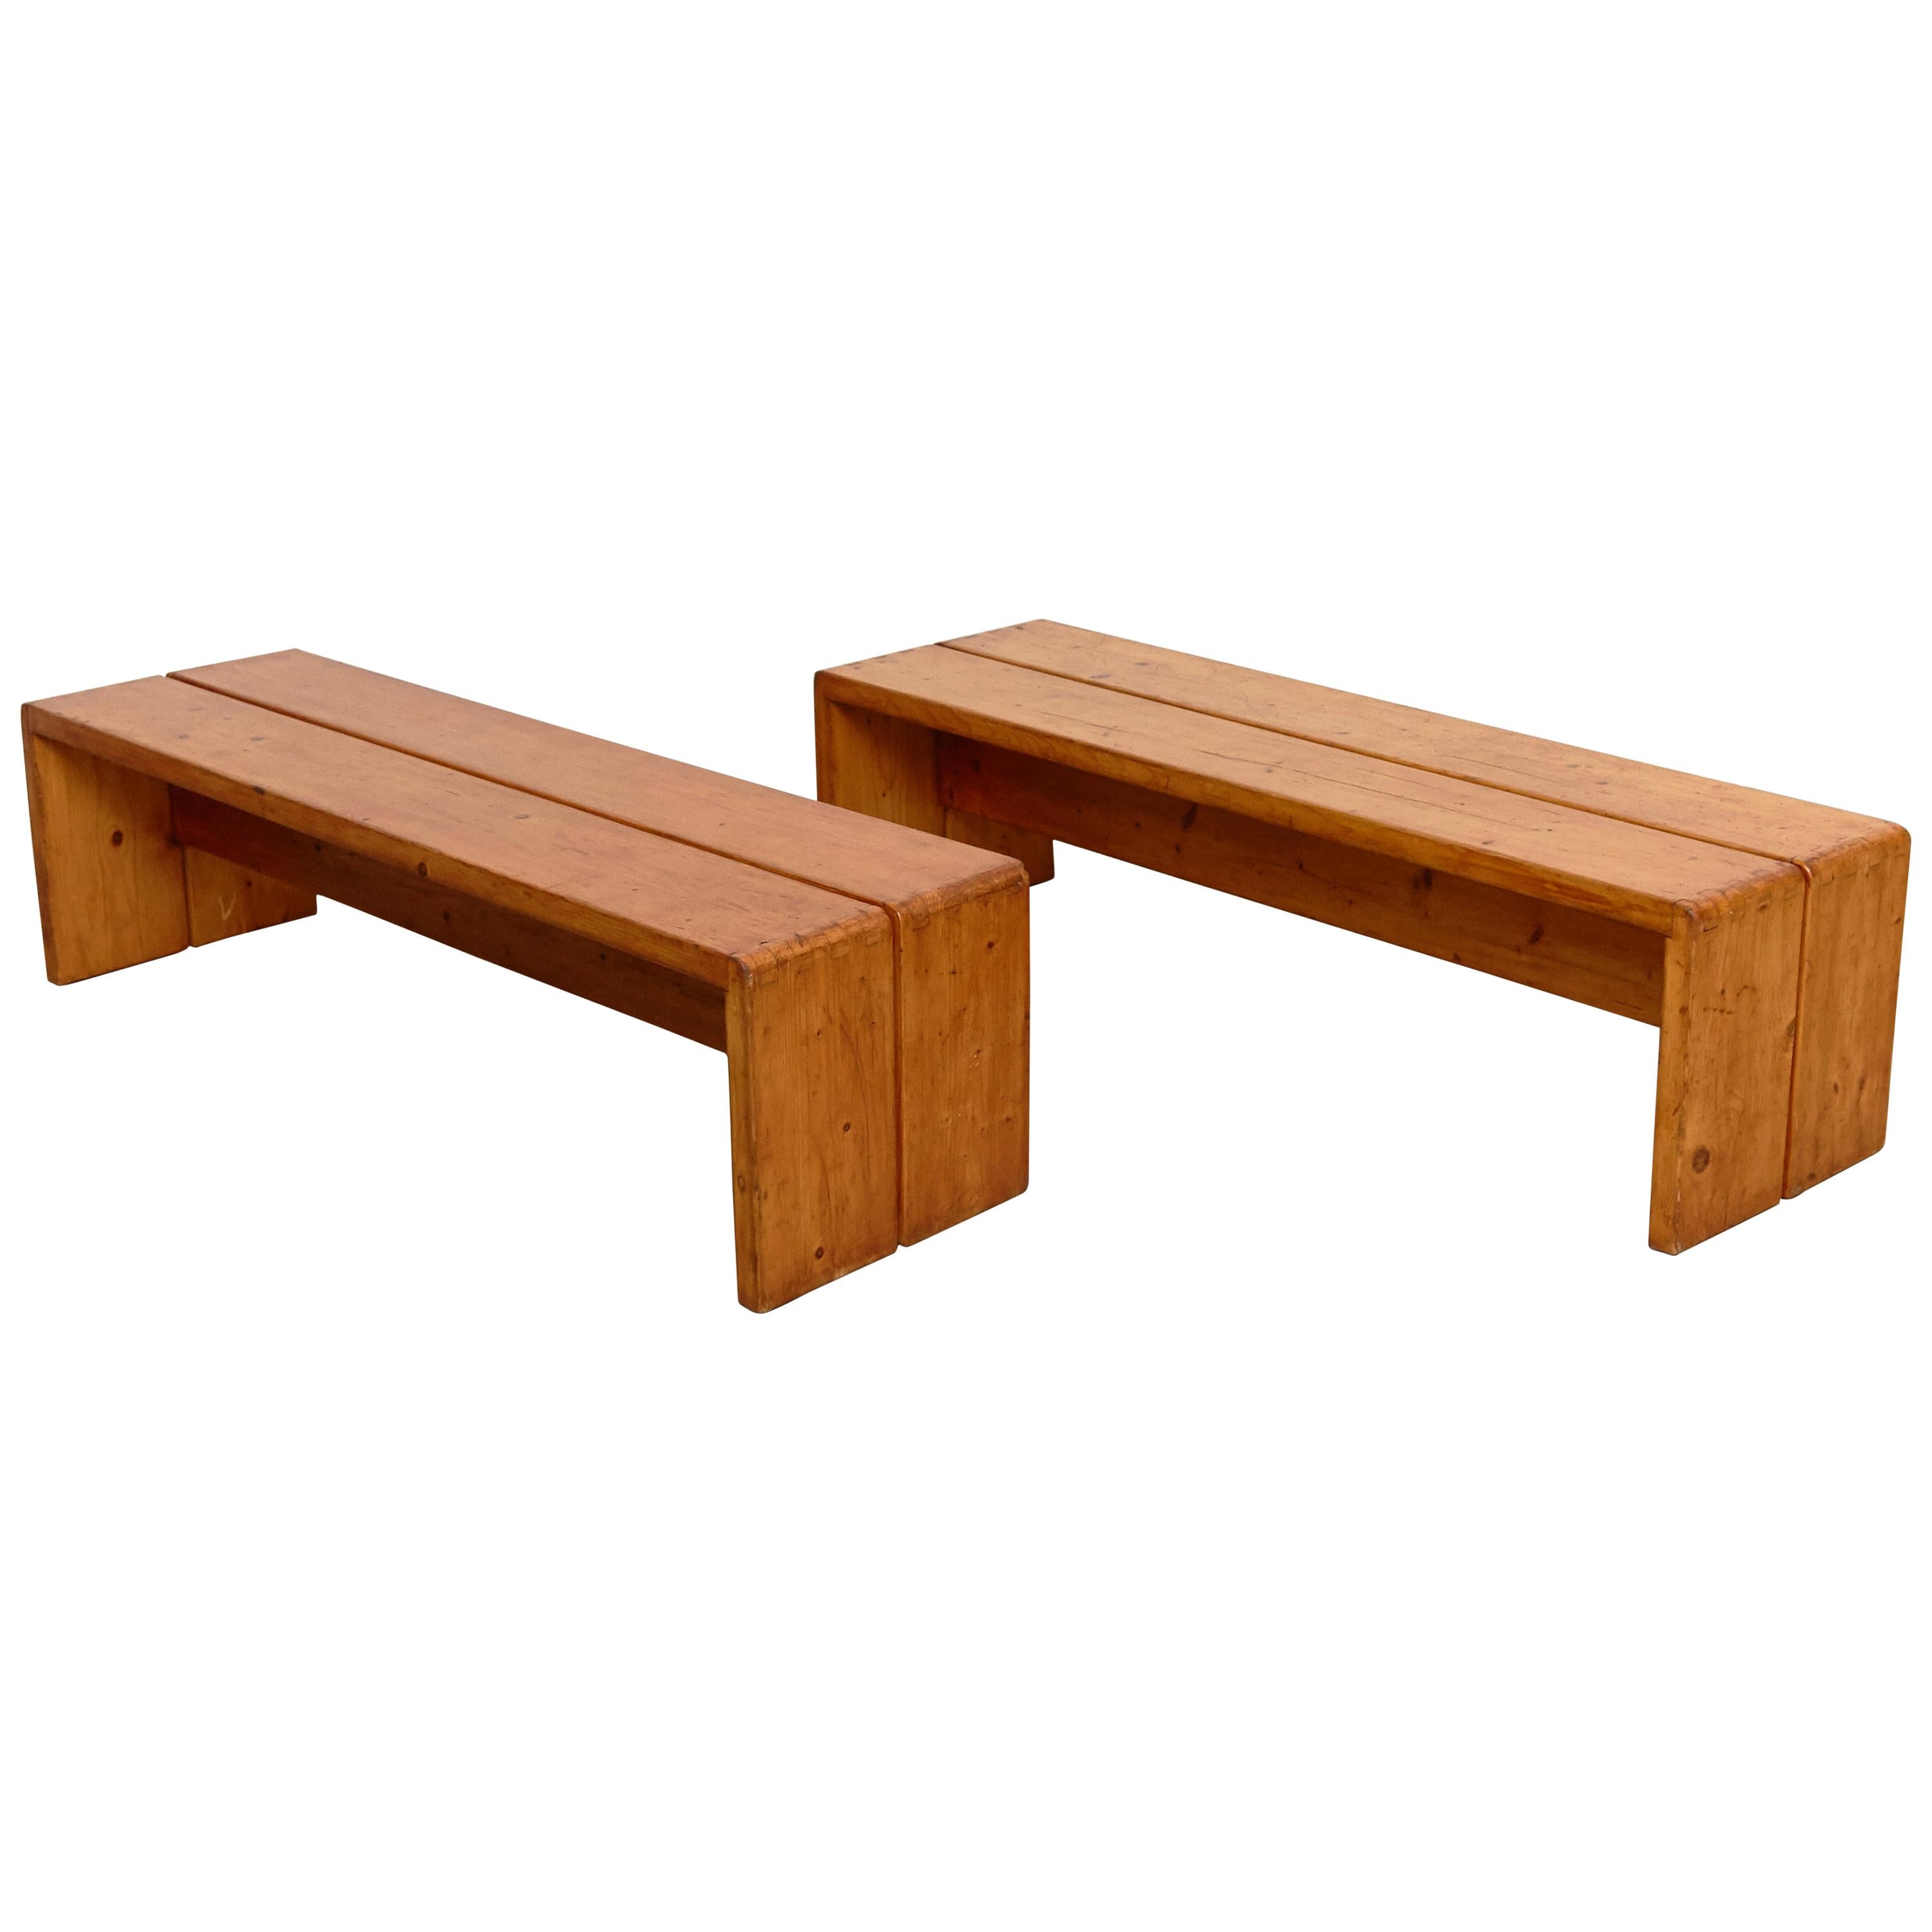 Charlotte Perriand, Pair of Large Wood Benches for Les Arcs, circa 1960